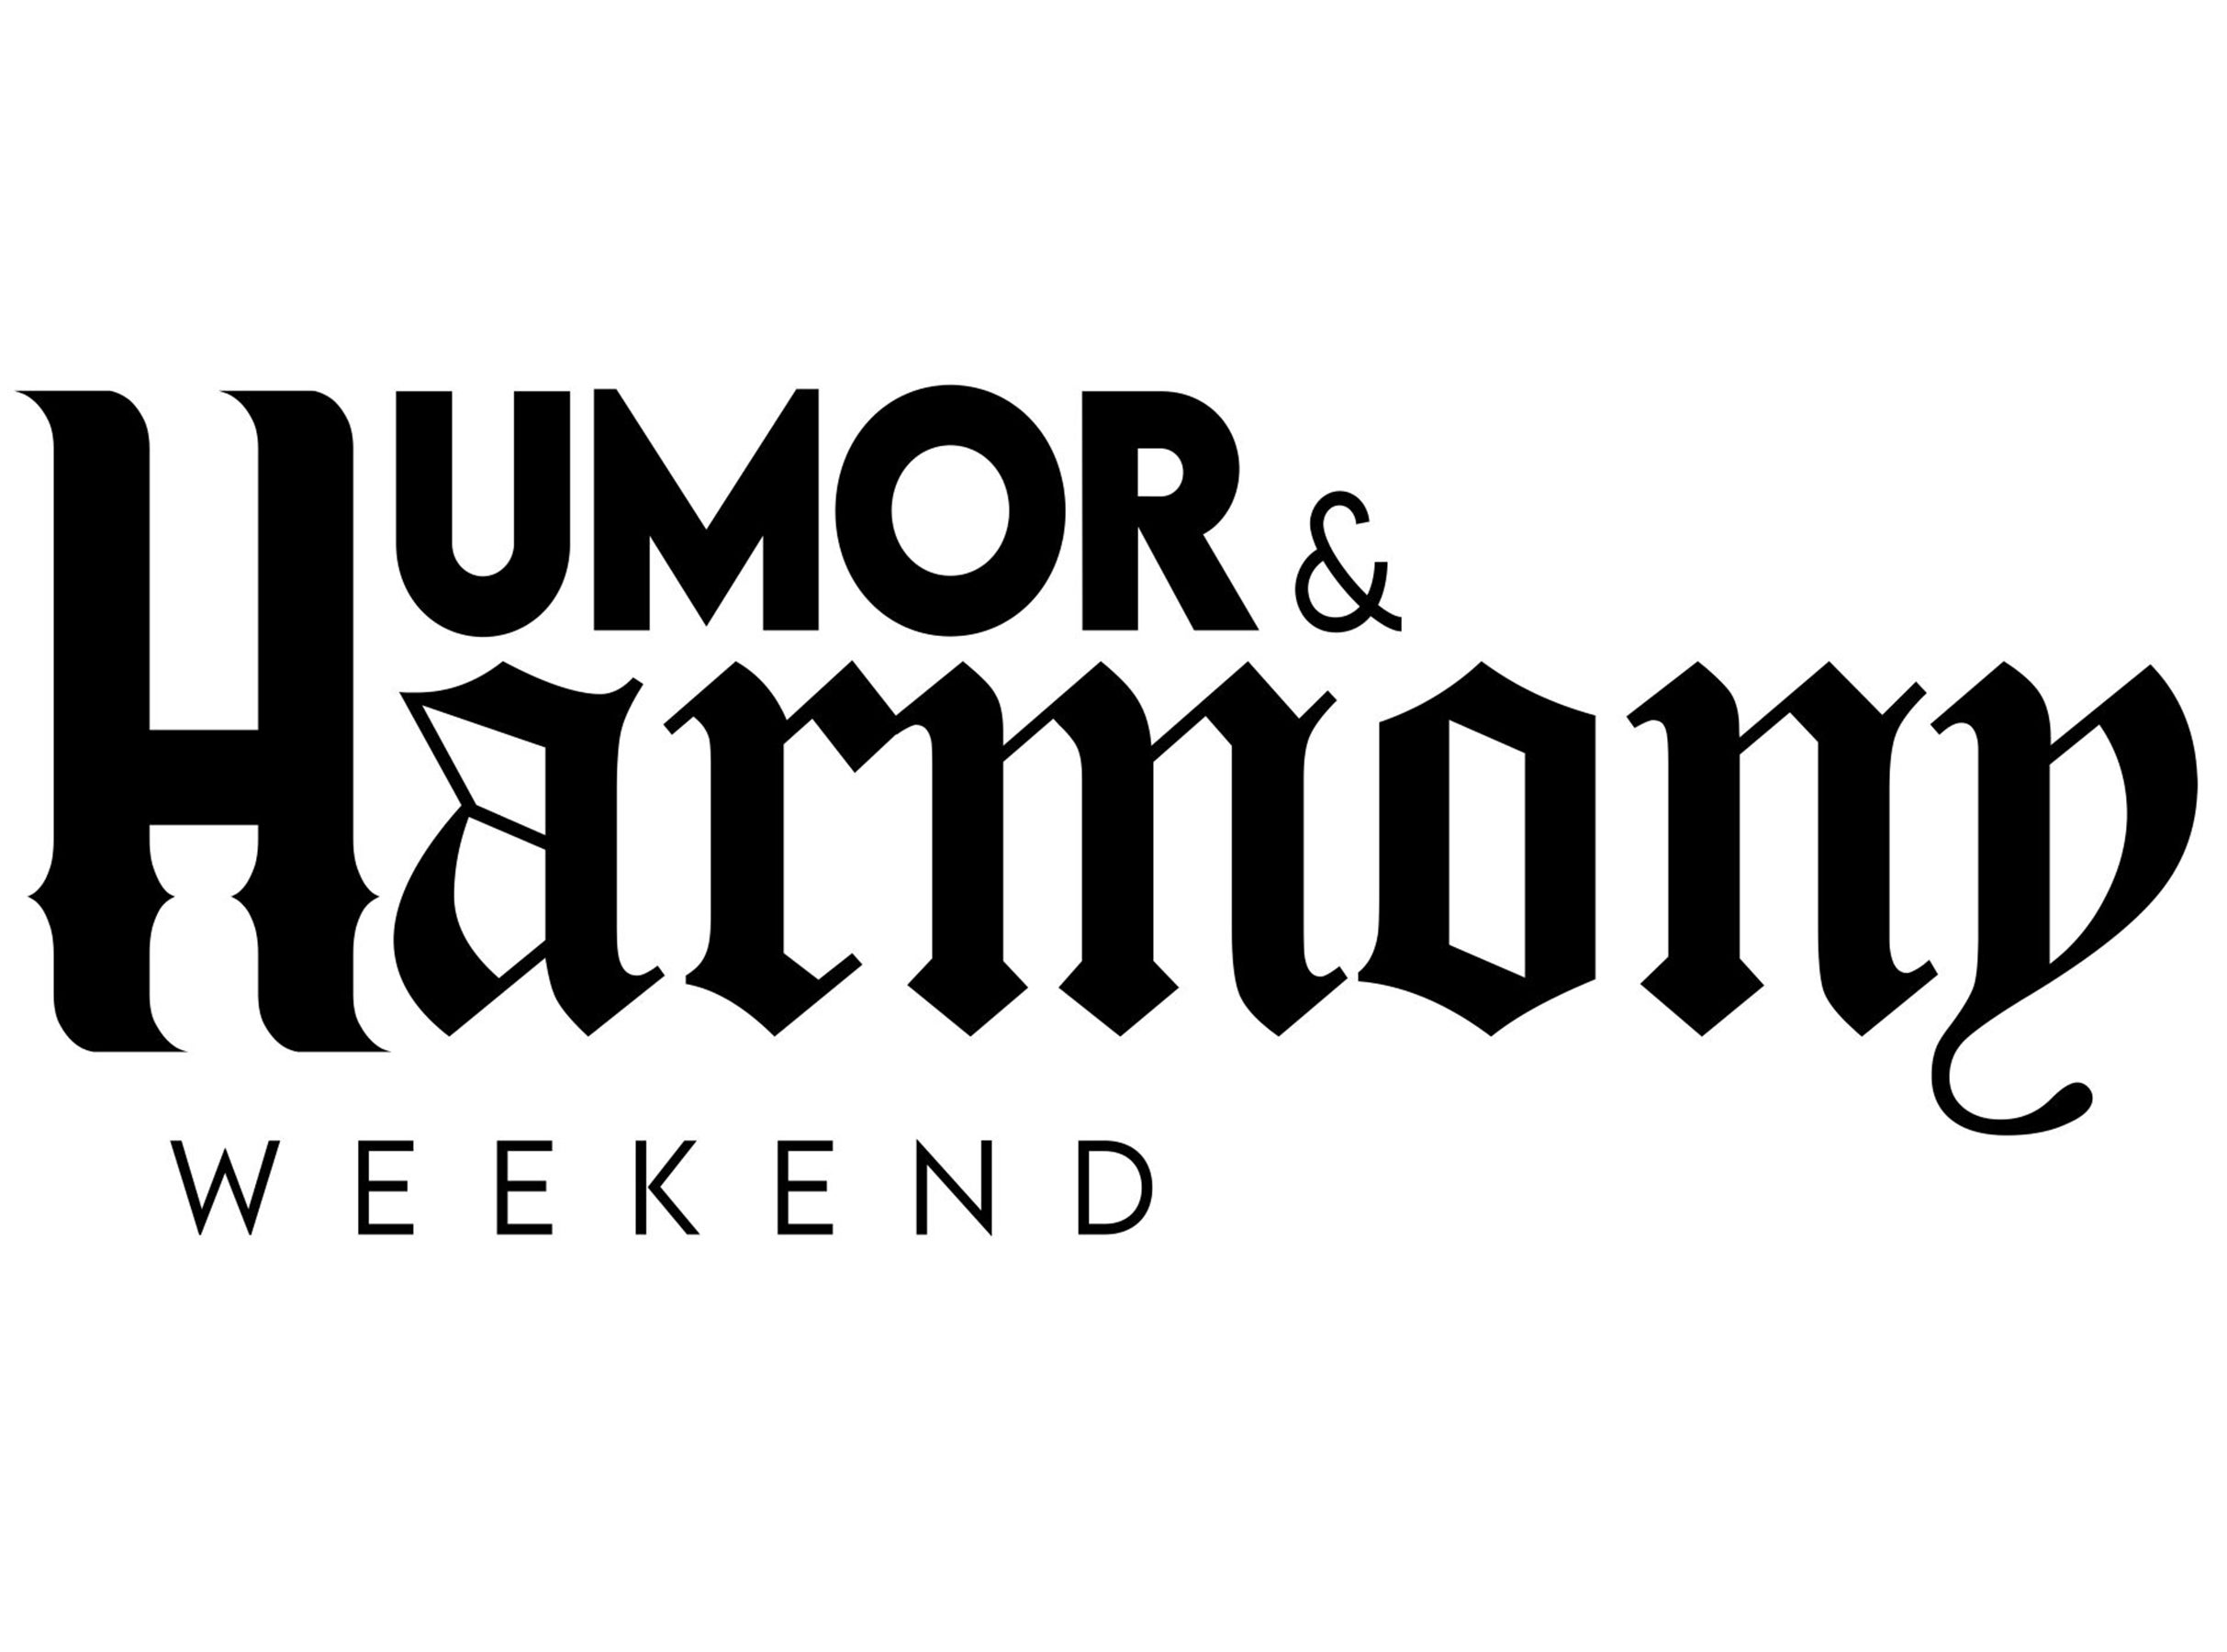 Humor & Harmony Weekend: 50 Cent & Friends - Saturday Ticket Only